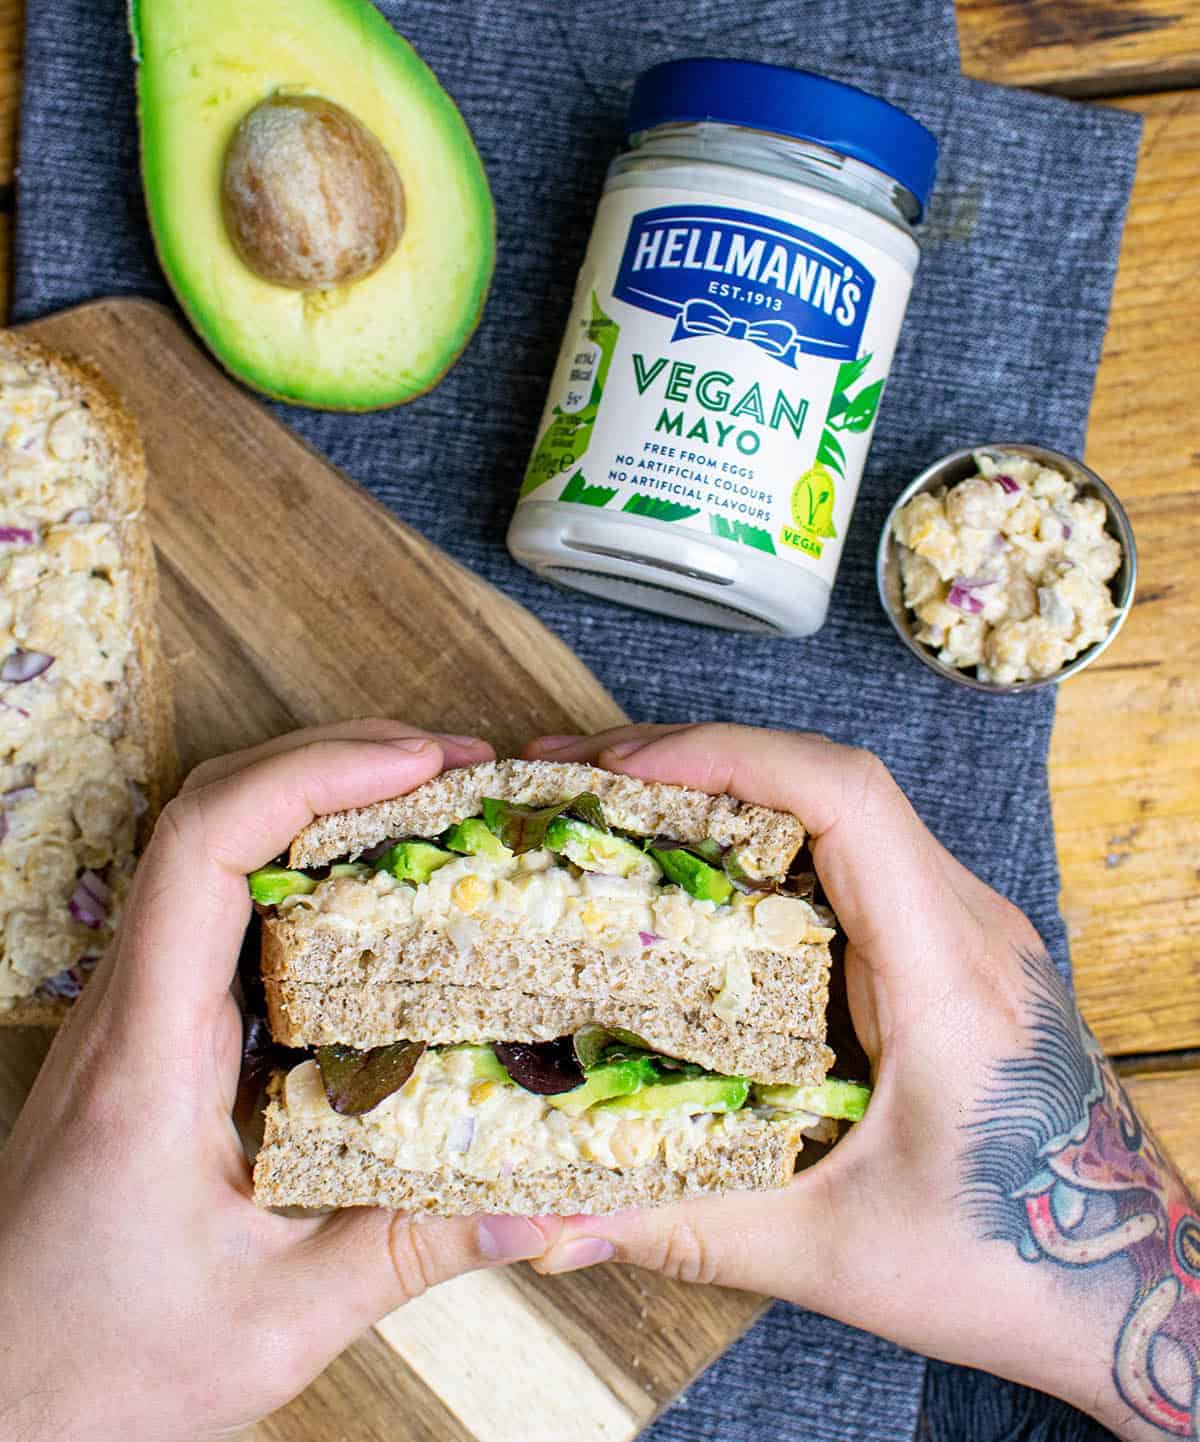 Chickpea tuna sandwich being held by a hand and with an avocado and a jar of Hellmanns mayo in the background